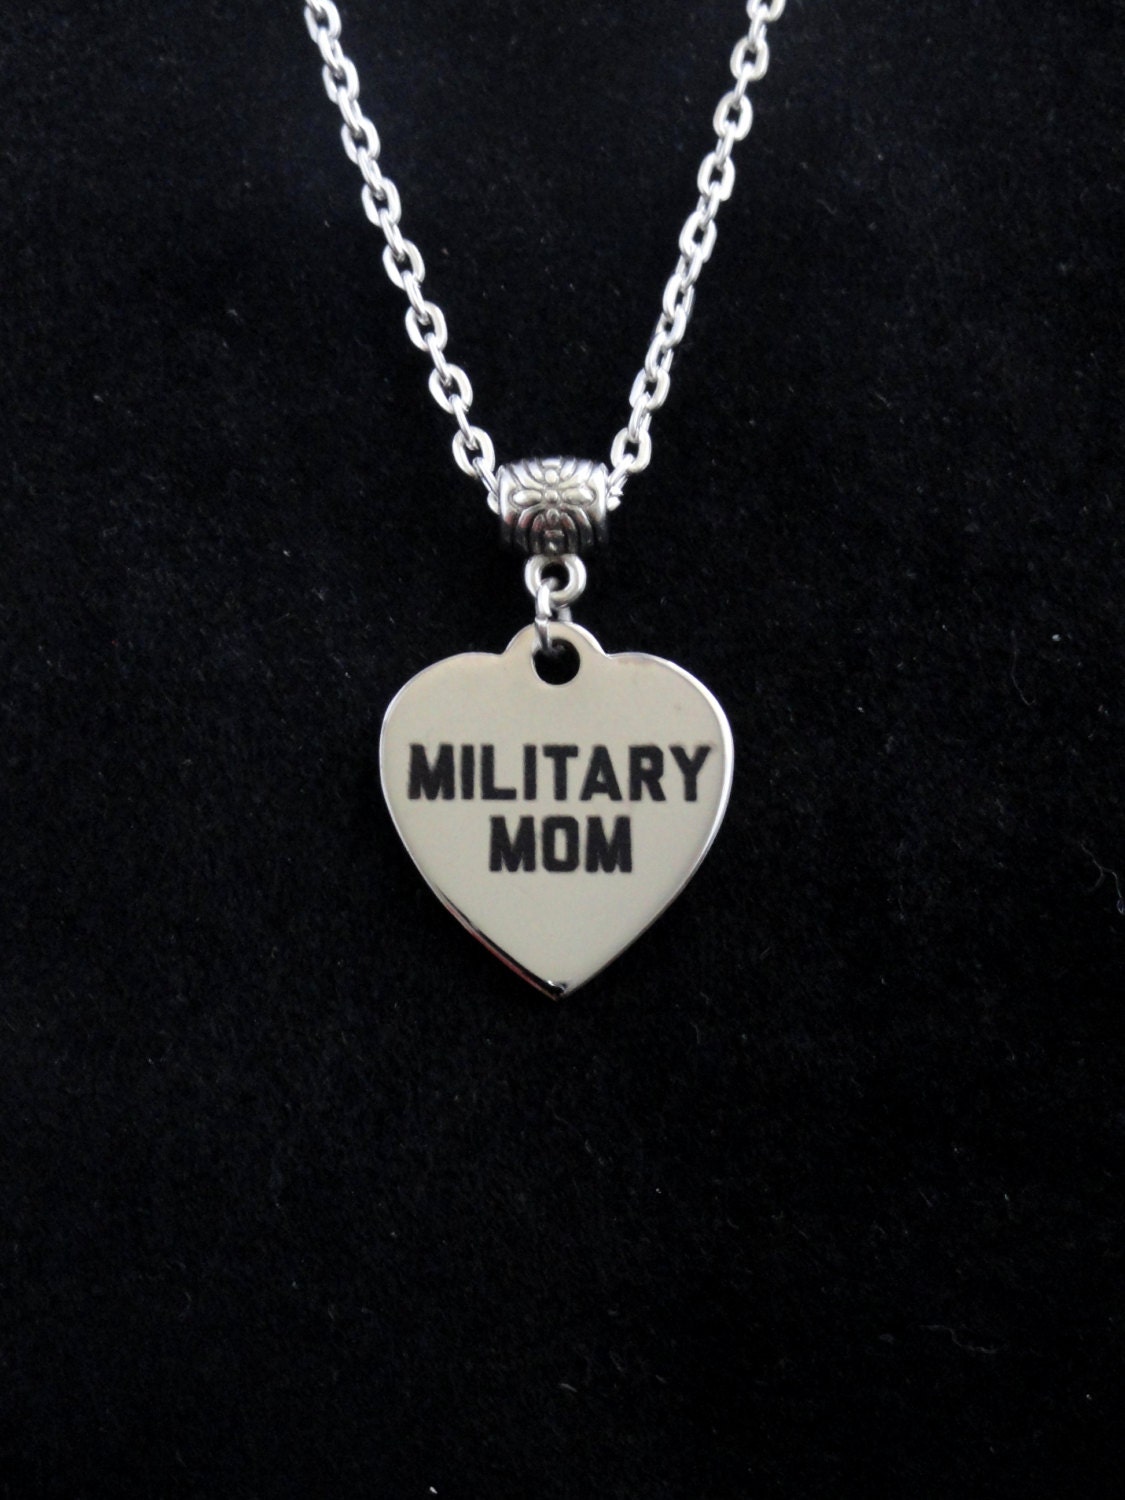 Military Mom necklace Military charm necklace Gift for Mom